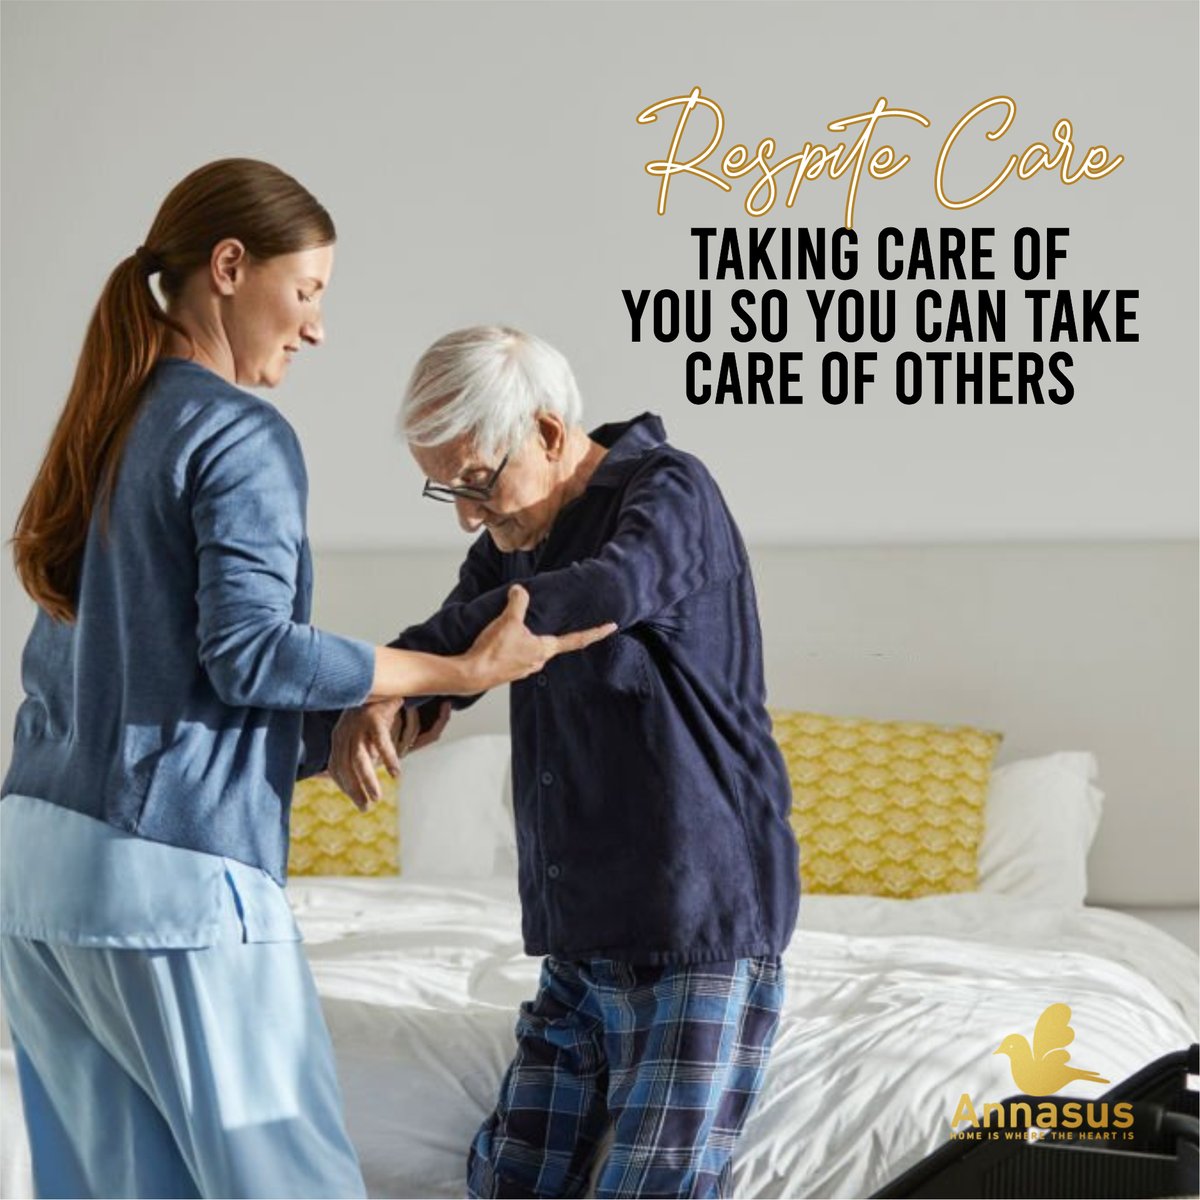 'Just like flight attendants advise putting on your oxygen mask first, self-care is essential. Our respite care services provide you with a much-needed break while ensuring your loved one receives exceptional care. Take care of yourself while taking care of others.

#RespiteCare